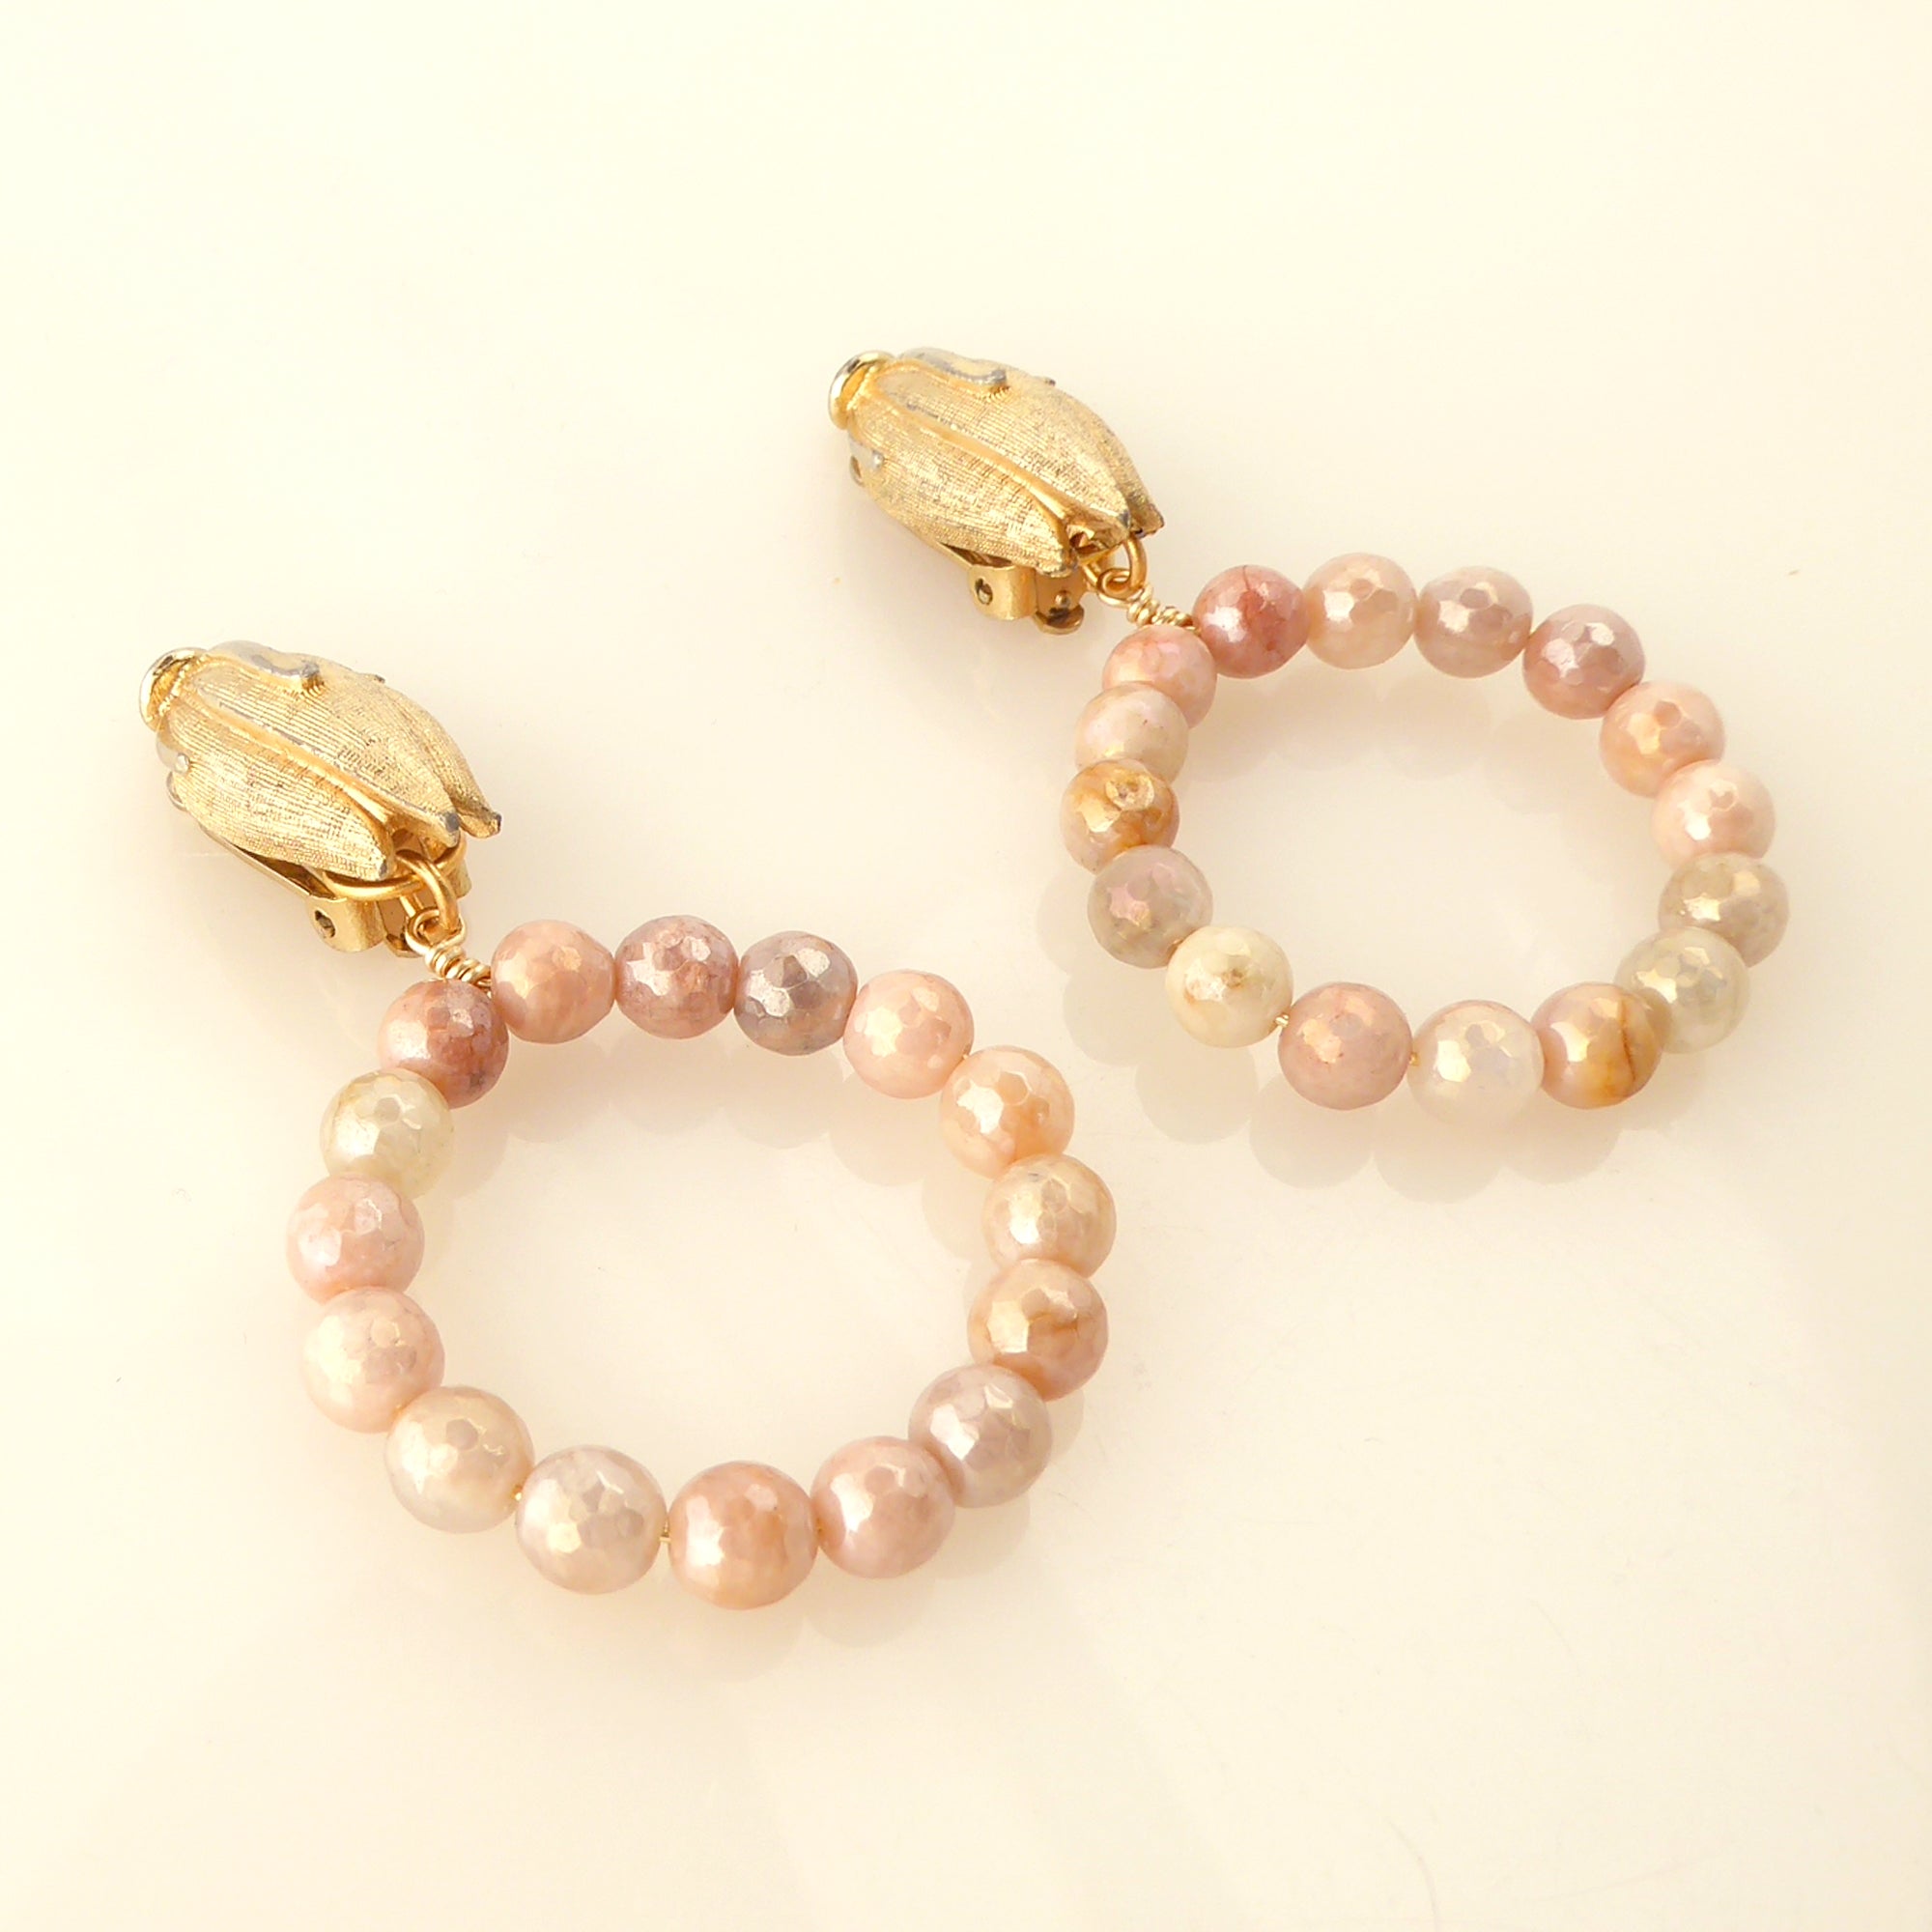 Iridescent peach moonstone earrings by Jenny Dayco 2